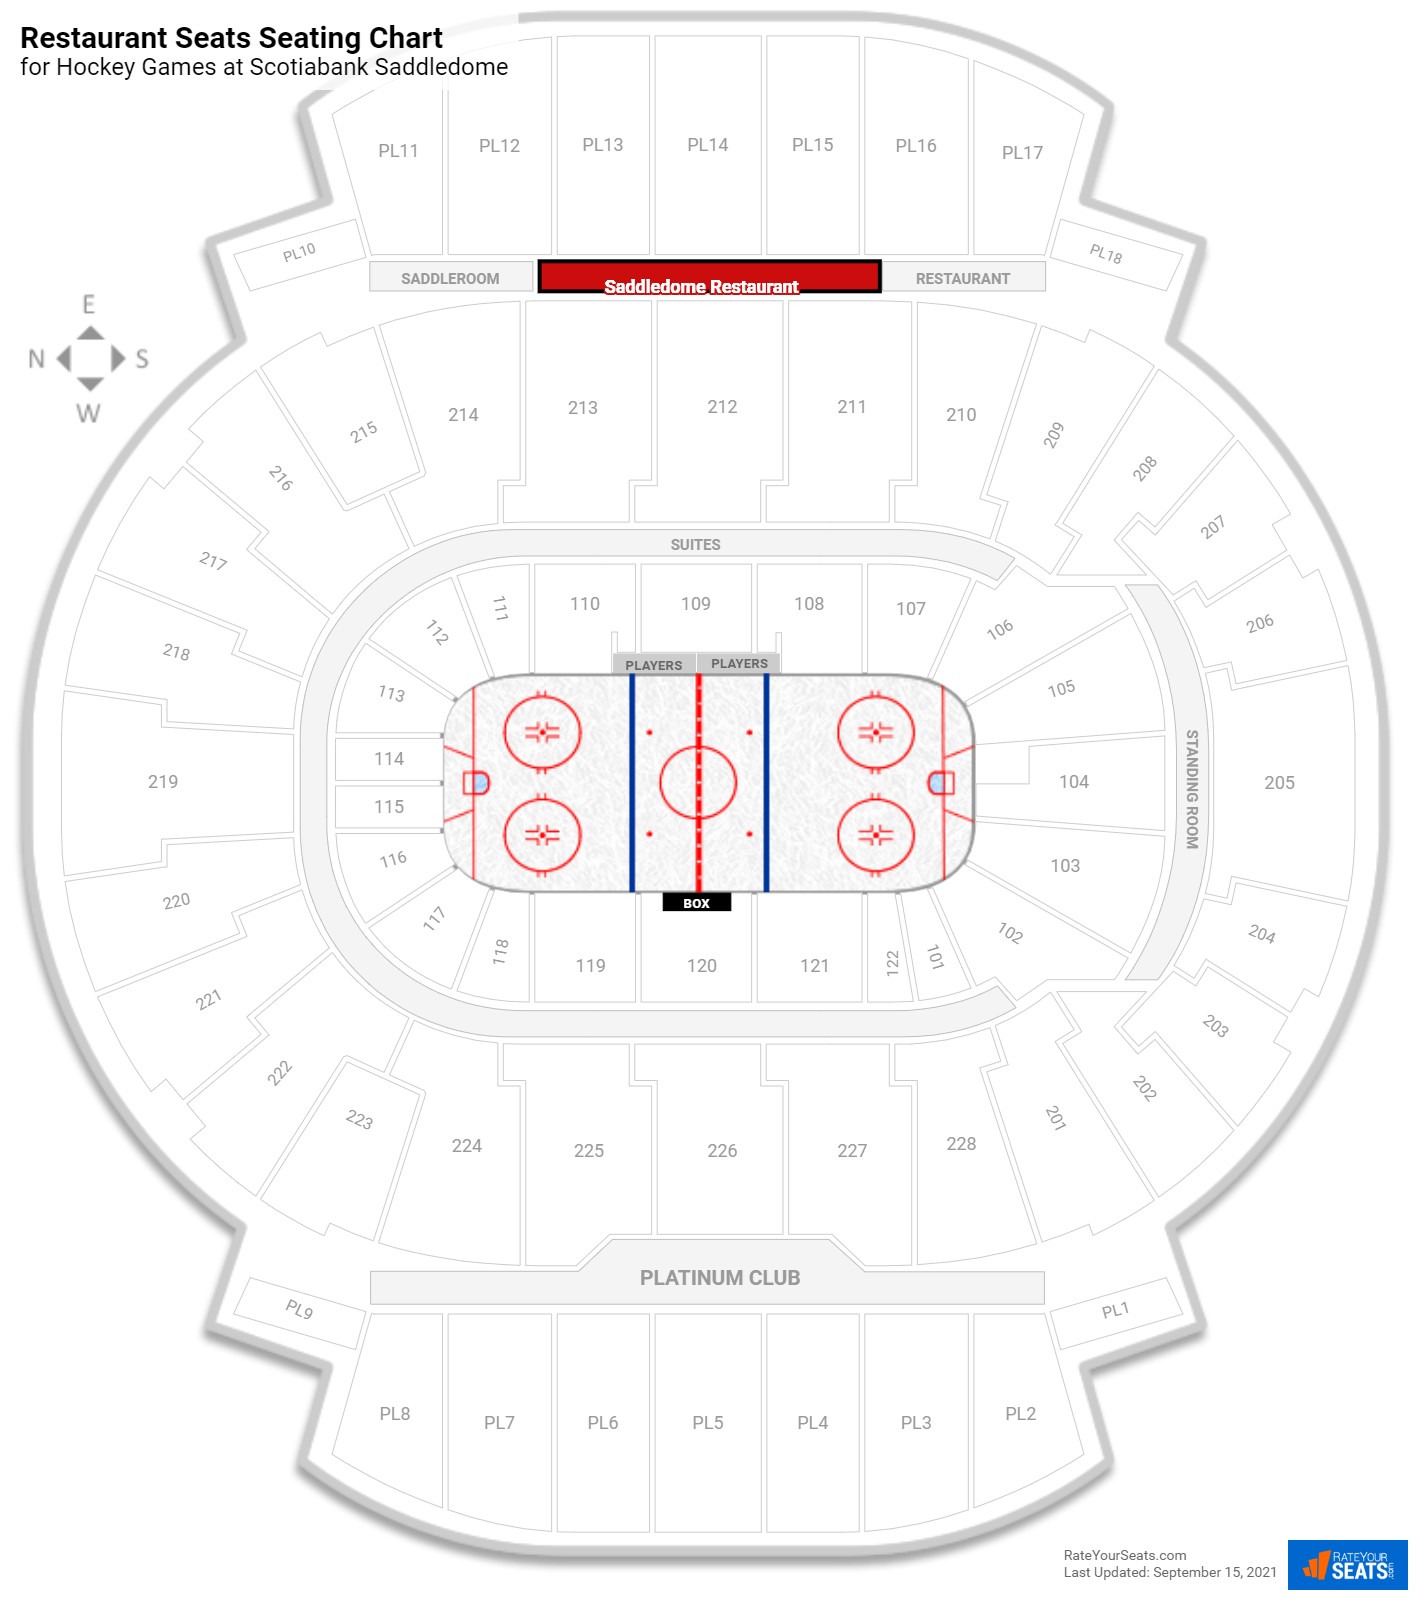 Calgary Flames' Press Level Seating At The Saddledome — The Blog